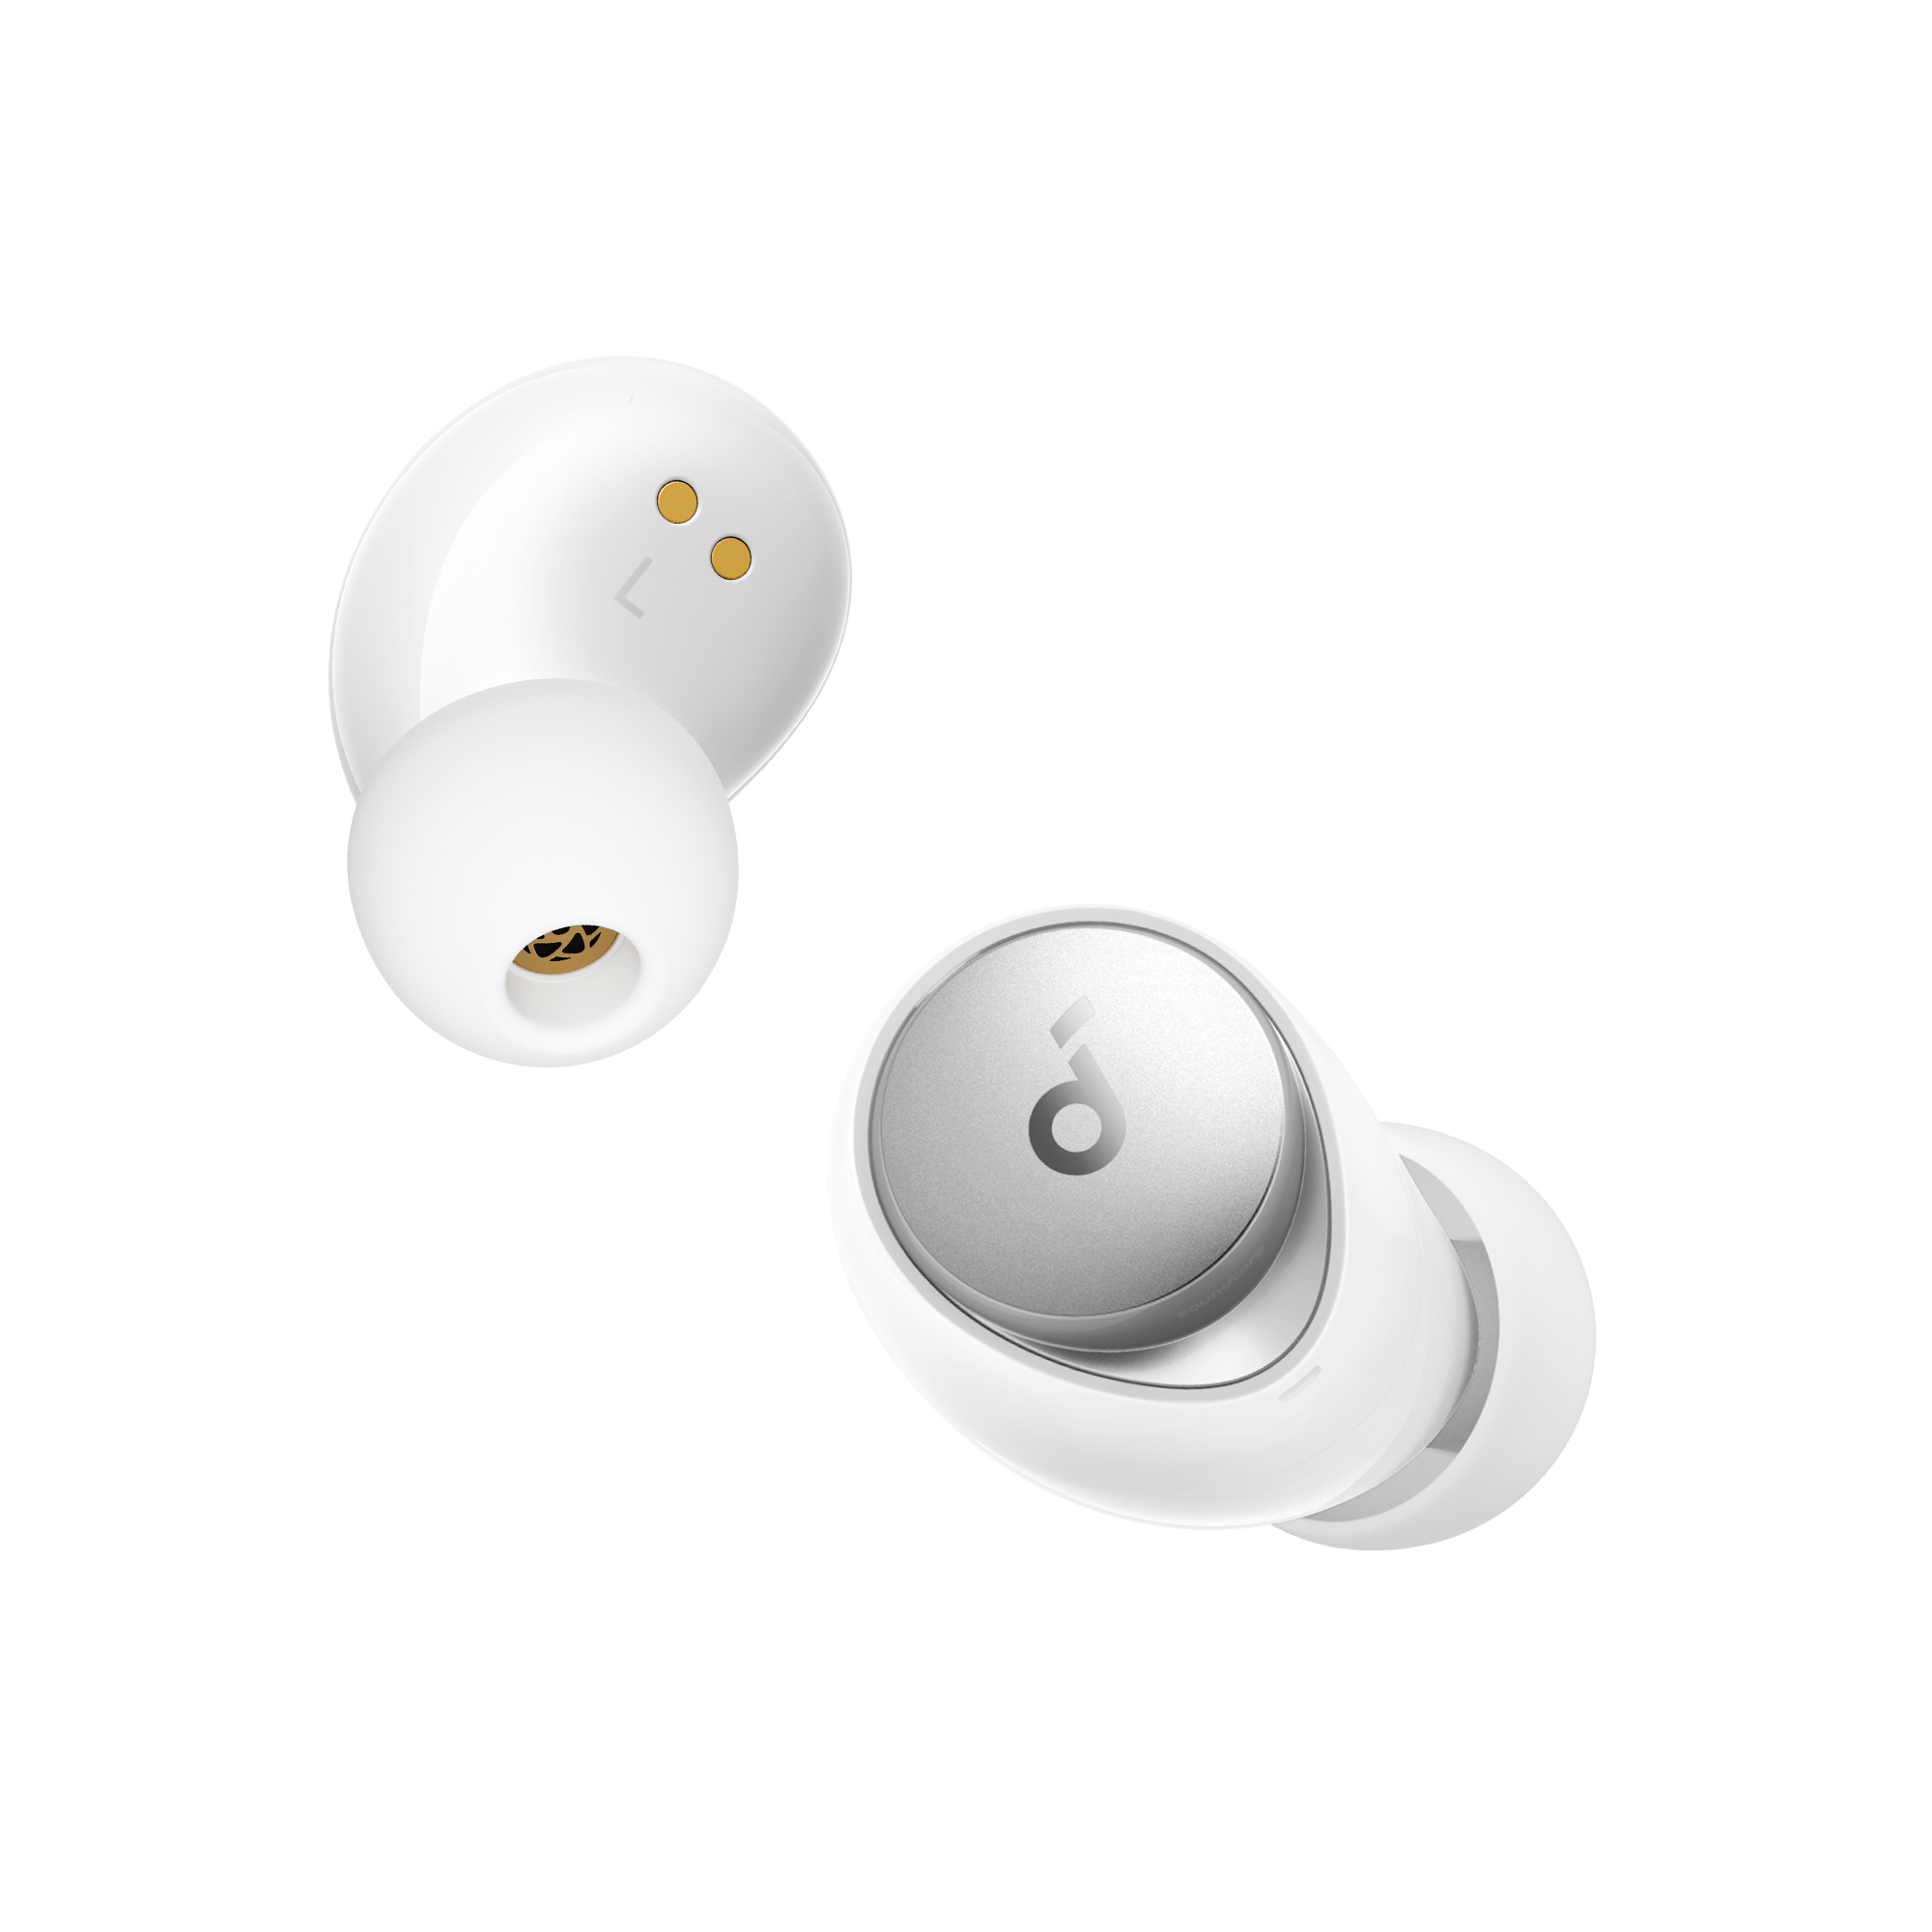 Soundcore A40 Wireless Earbuds - White